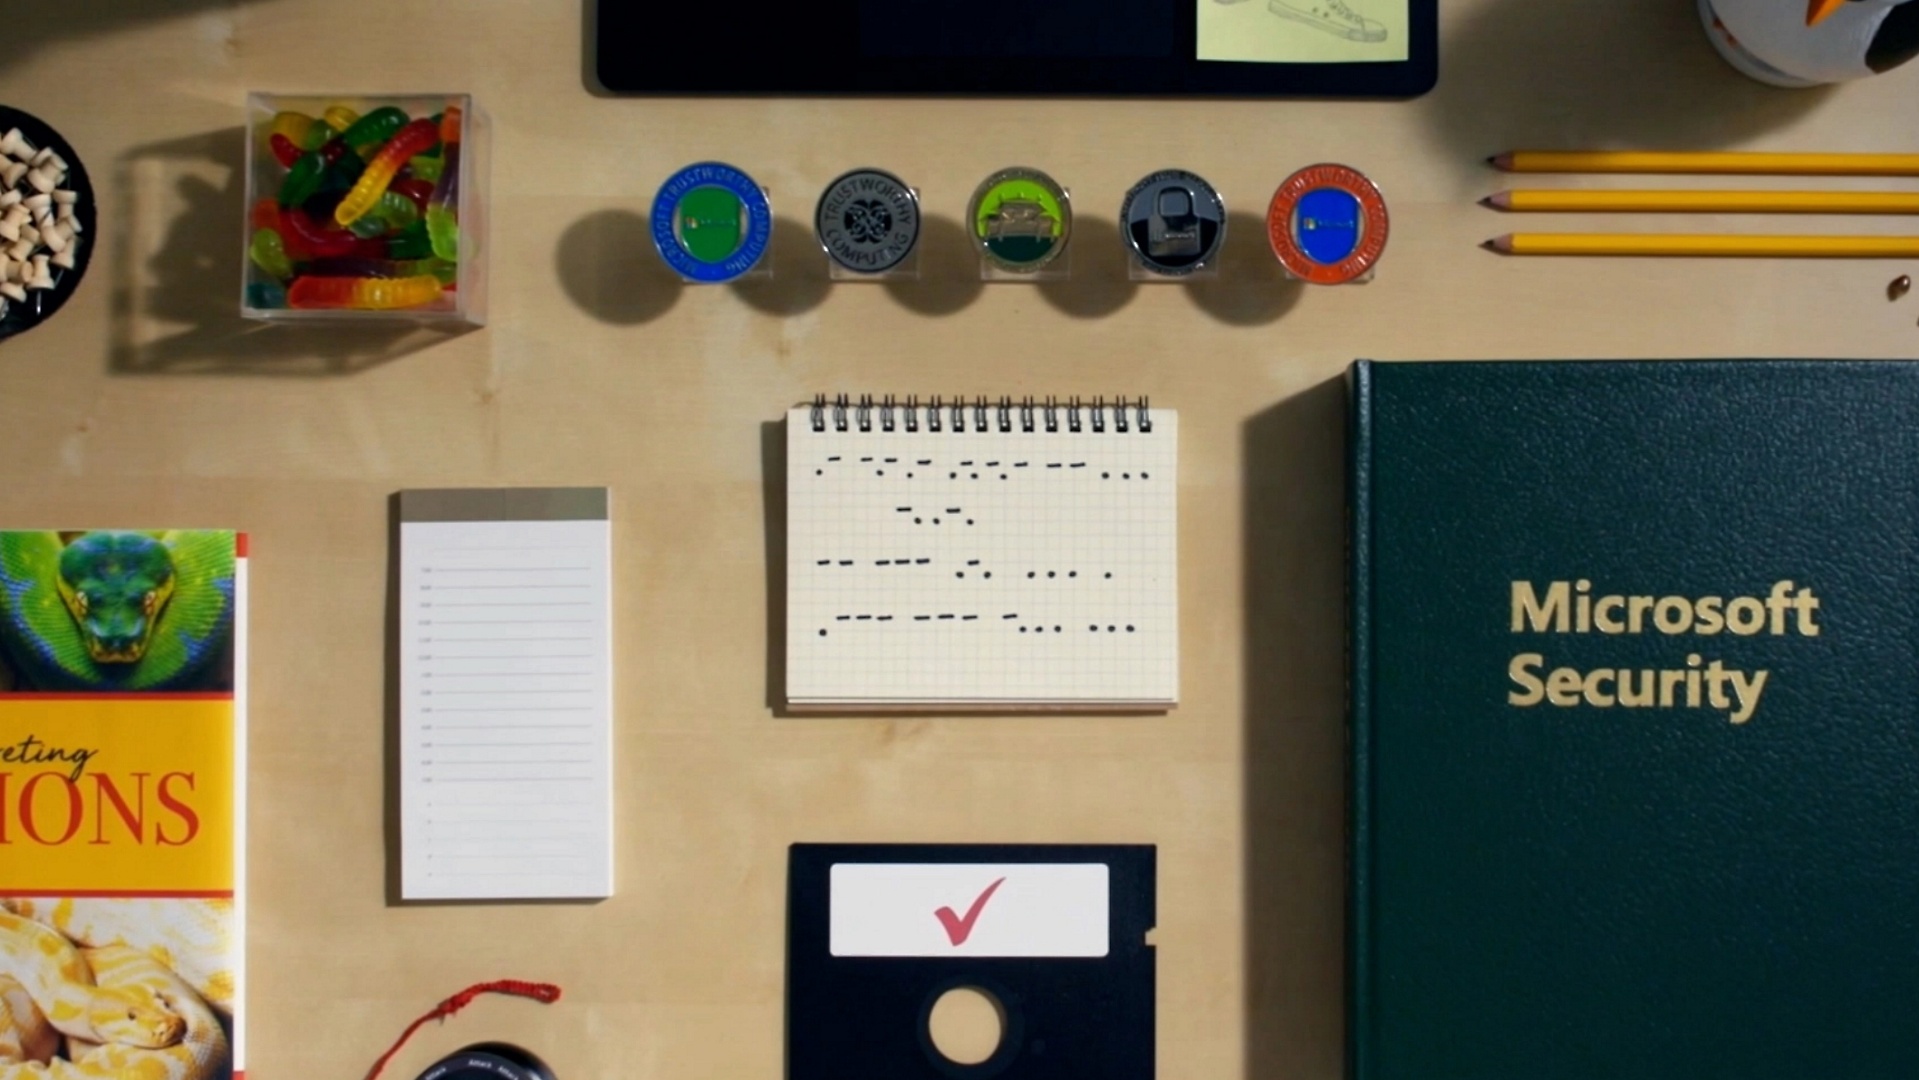 Items organized on a desk such as candy, notepads, a floppy disk and more